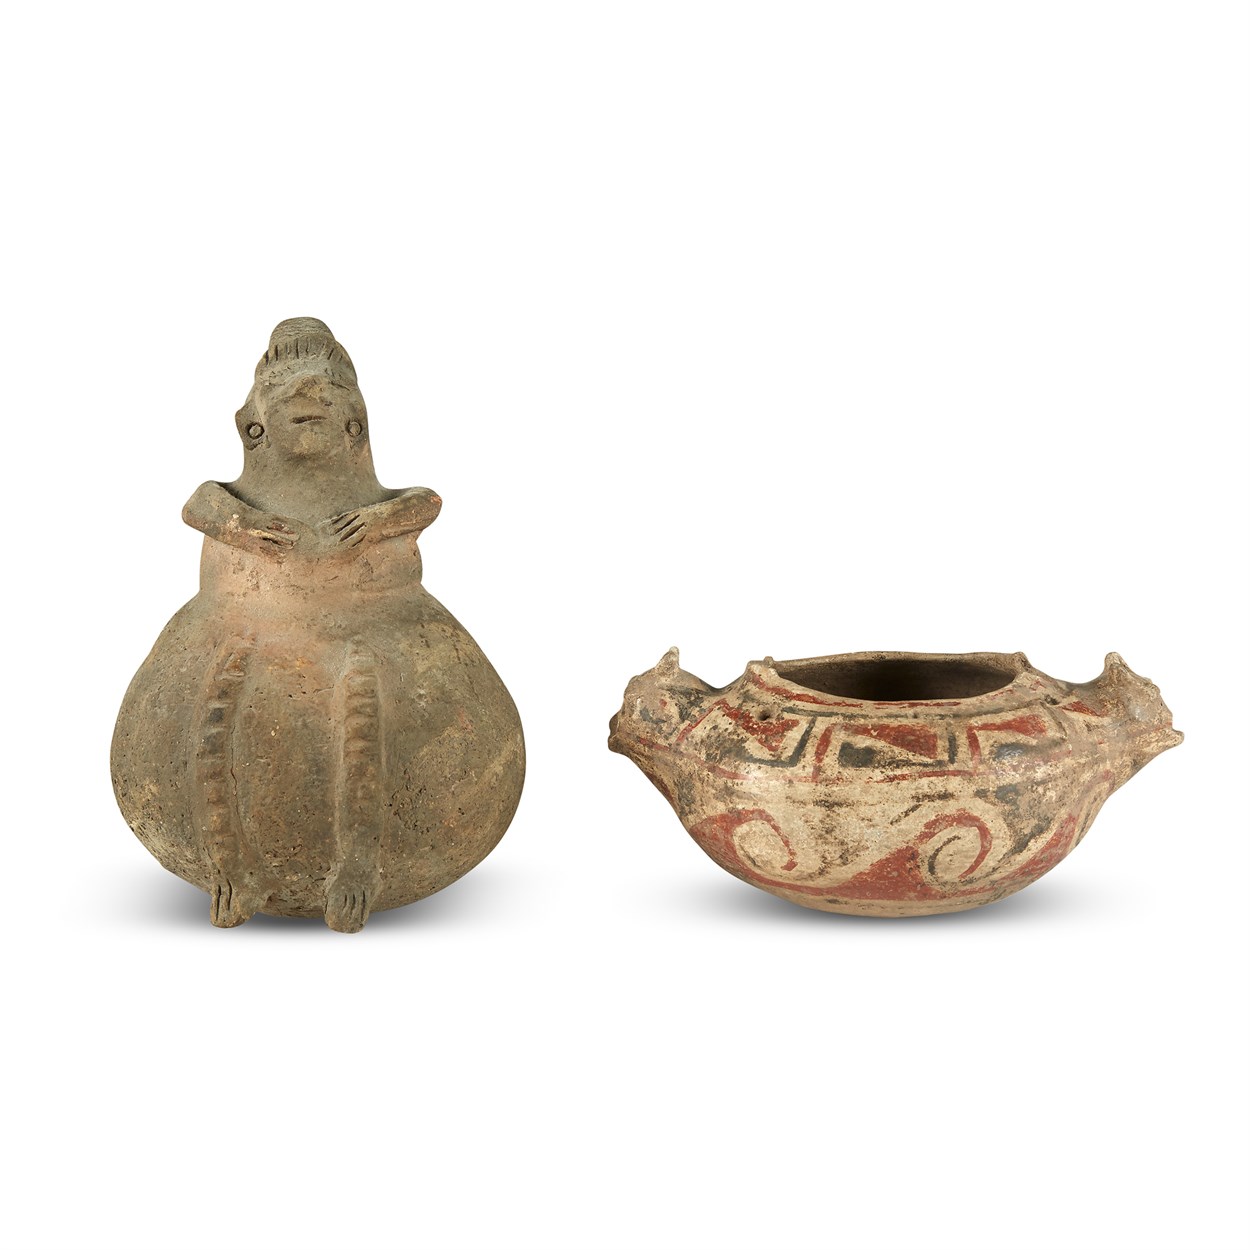 Lot 66 - Two Pre-Columbian pottery vessels